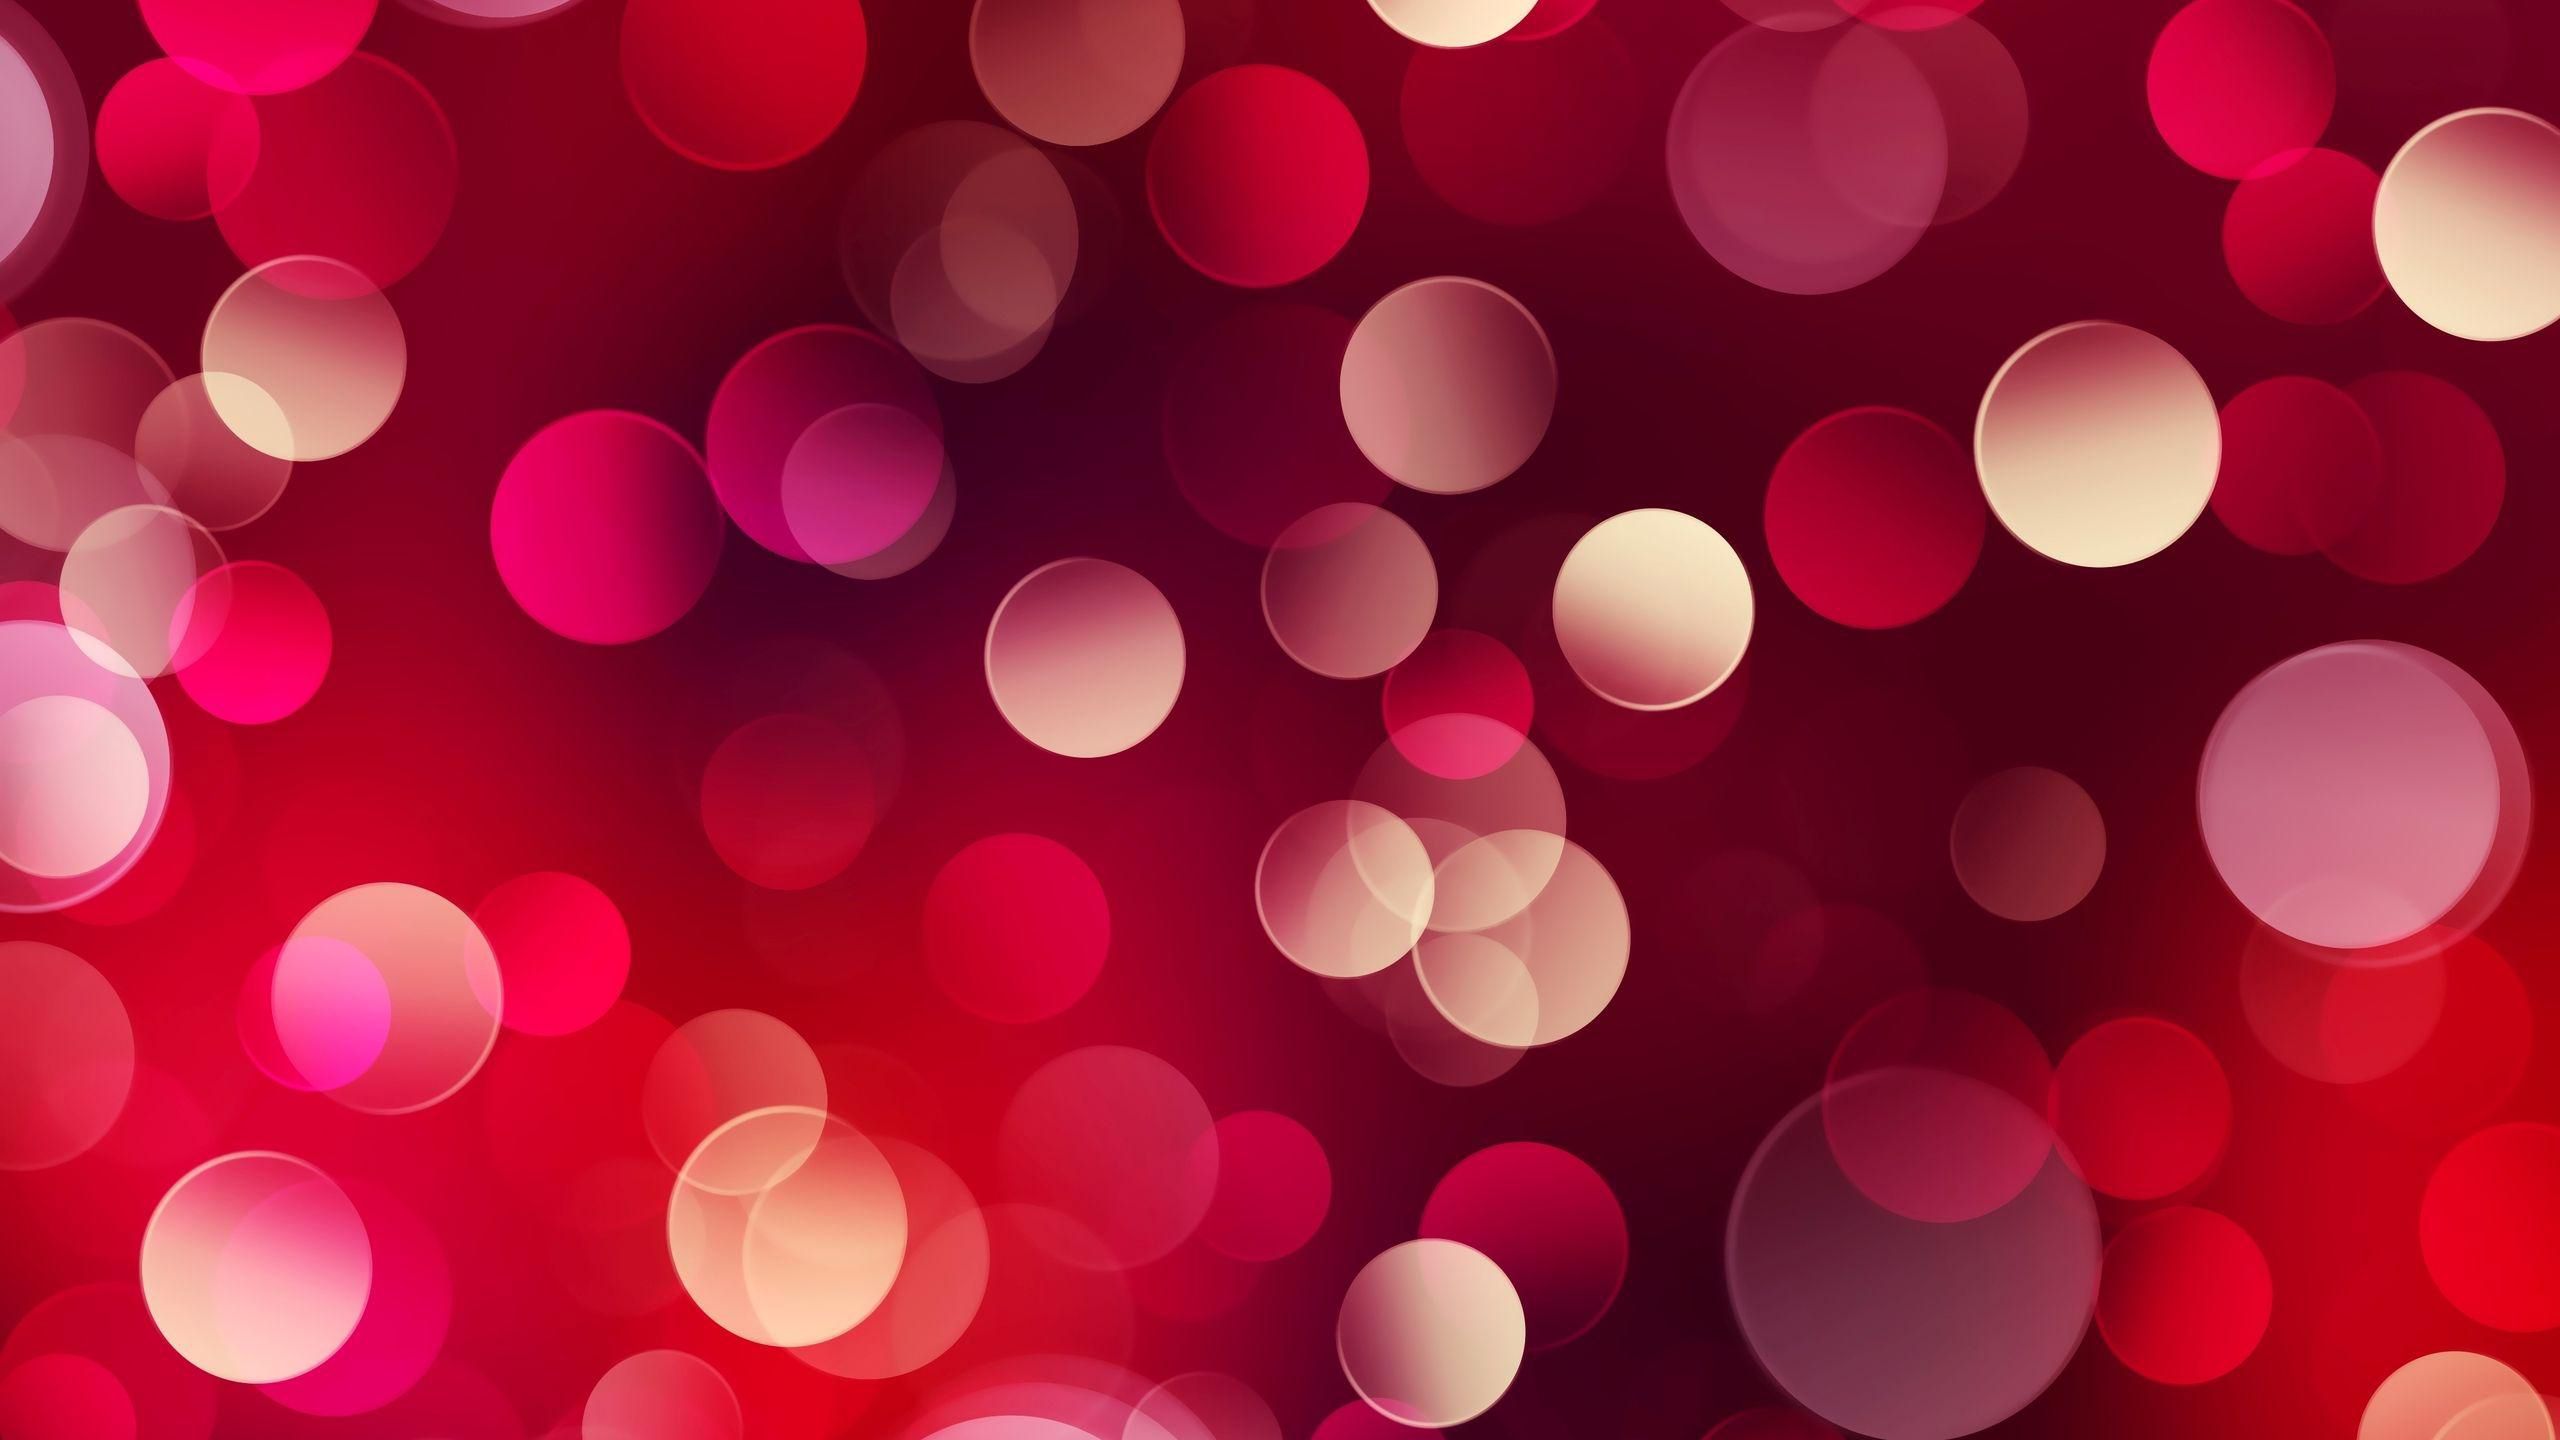 Red And White Circles HD Red Aesthetic Wallpaper